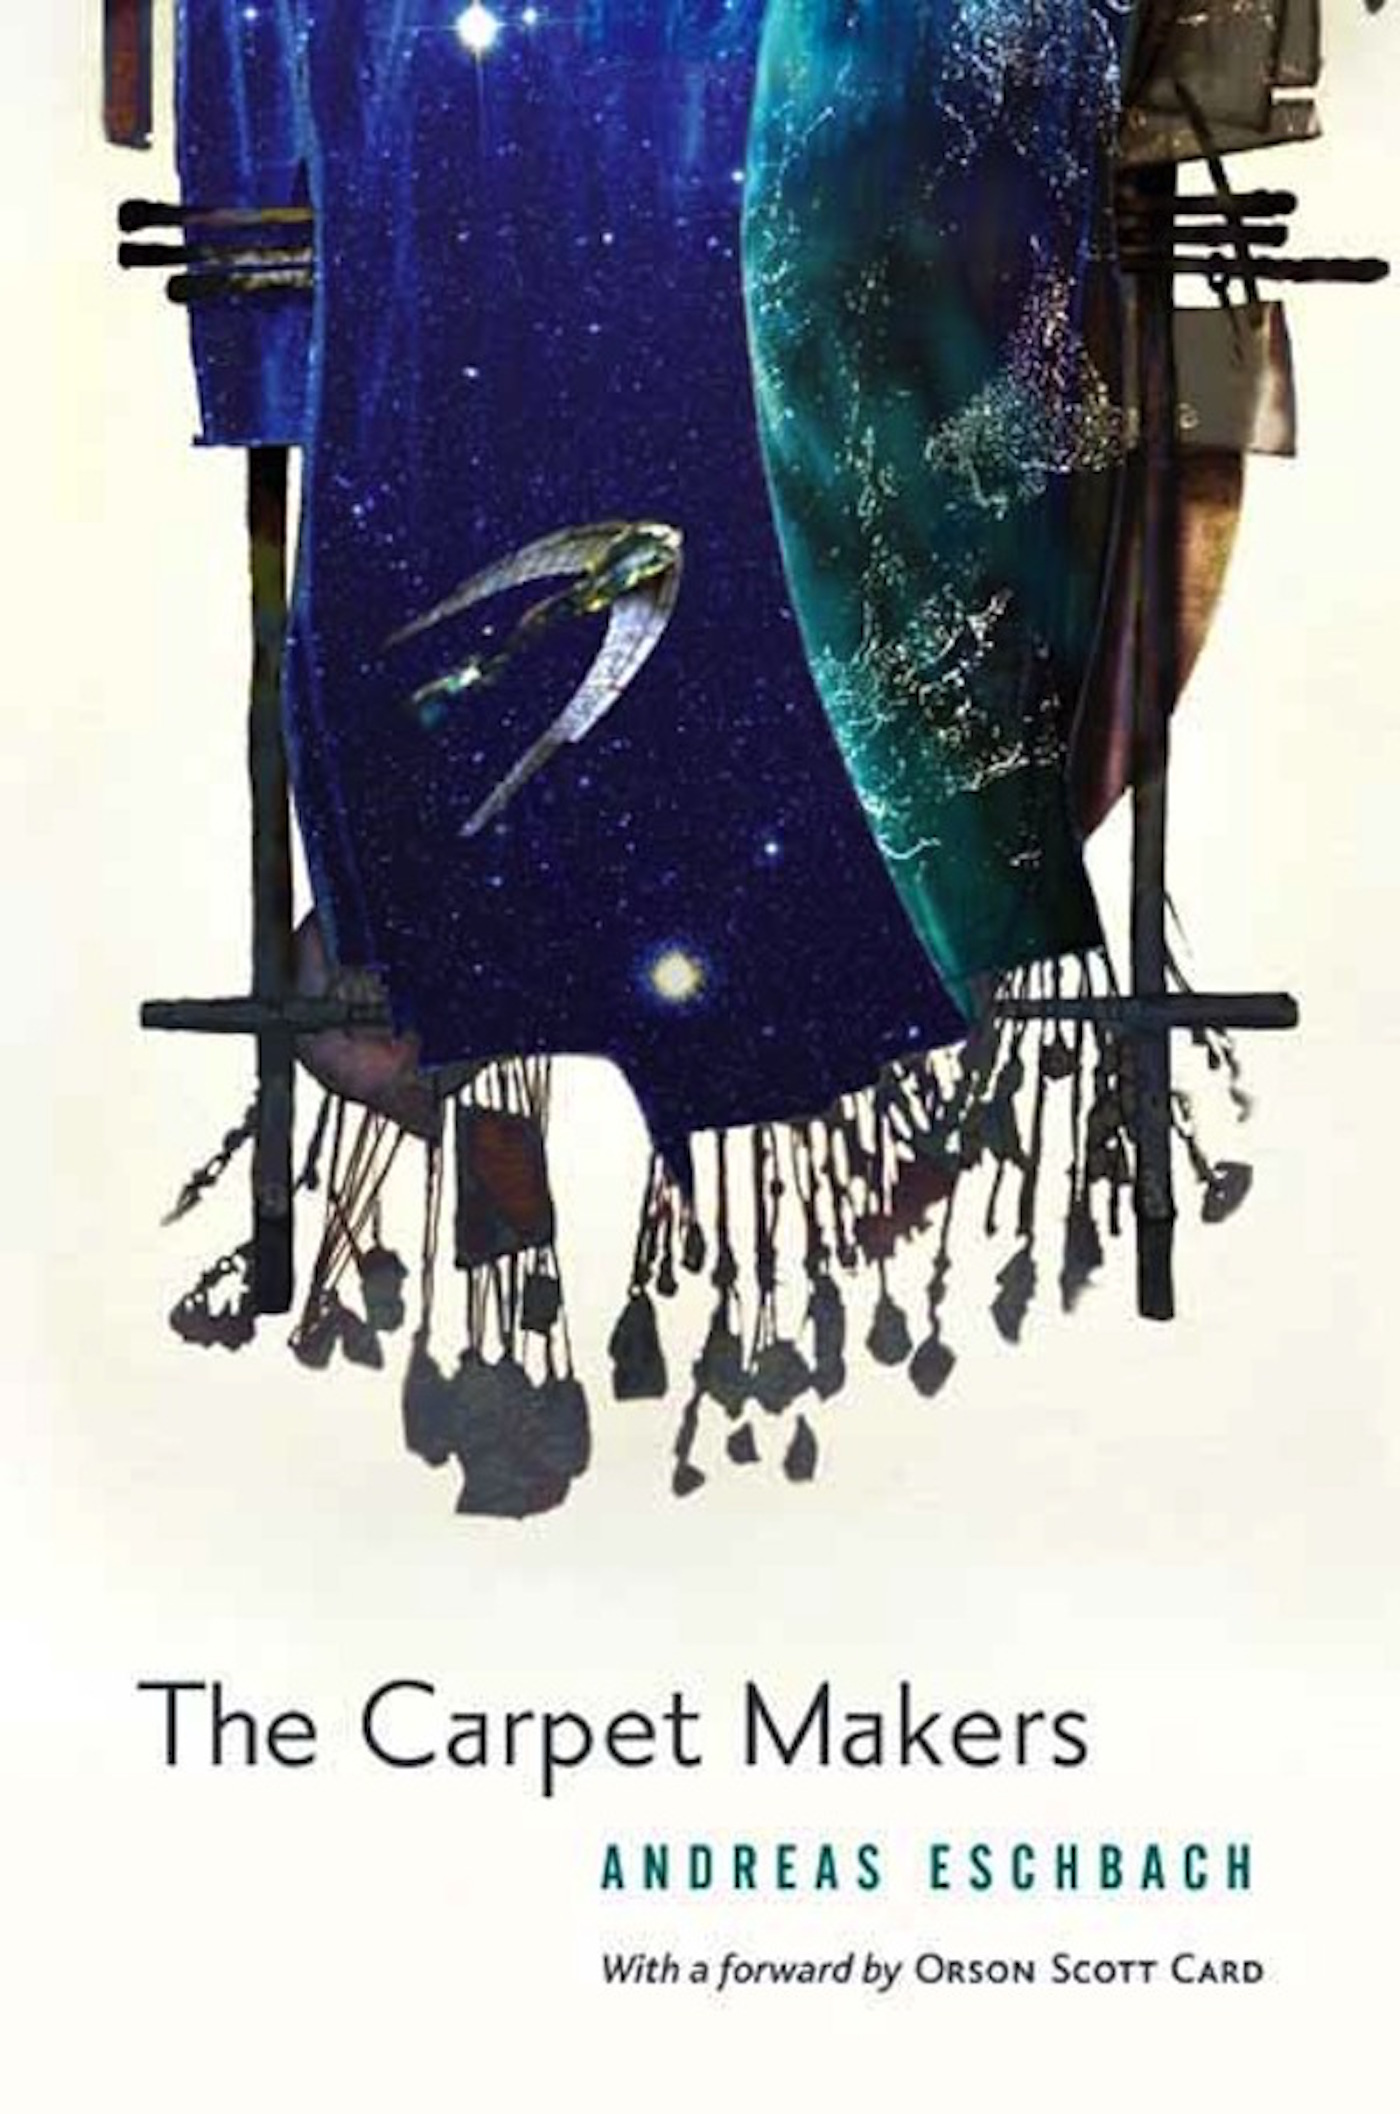 The Carpet Makers by Andreas Eschbach